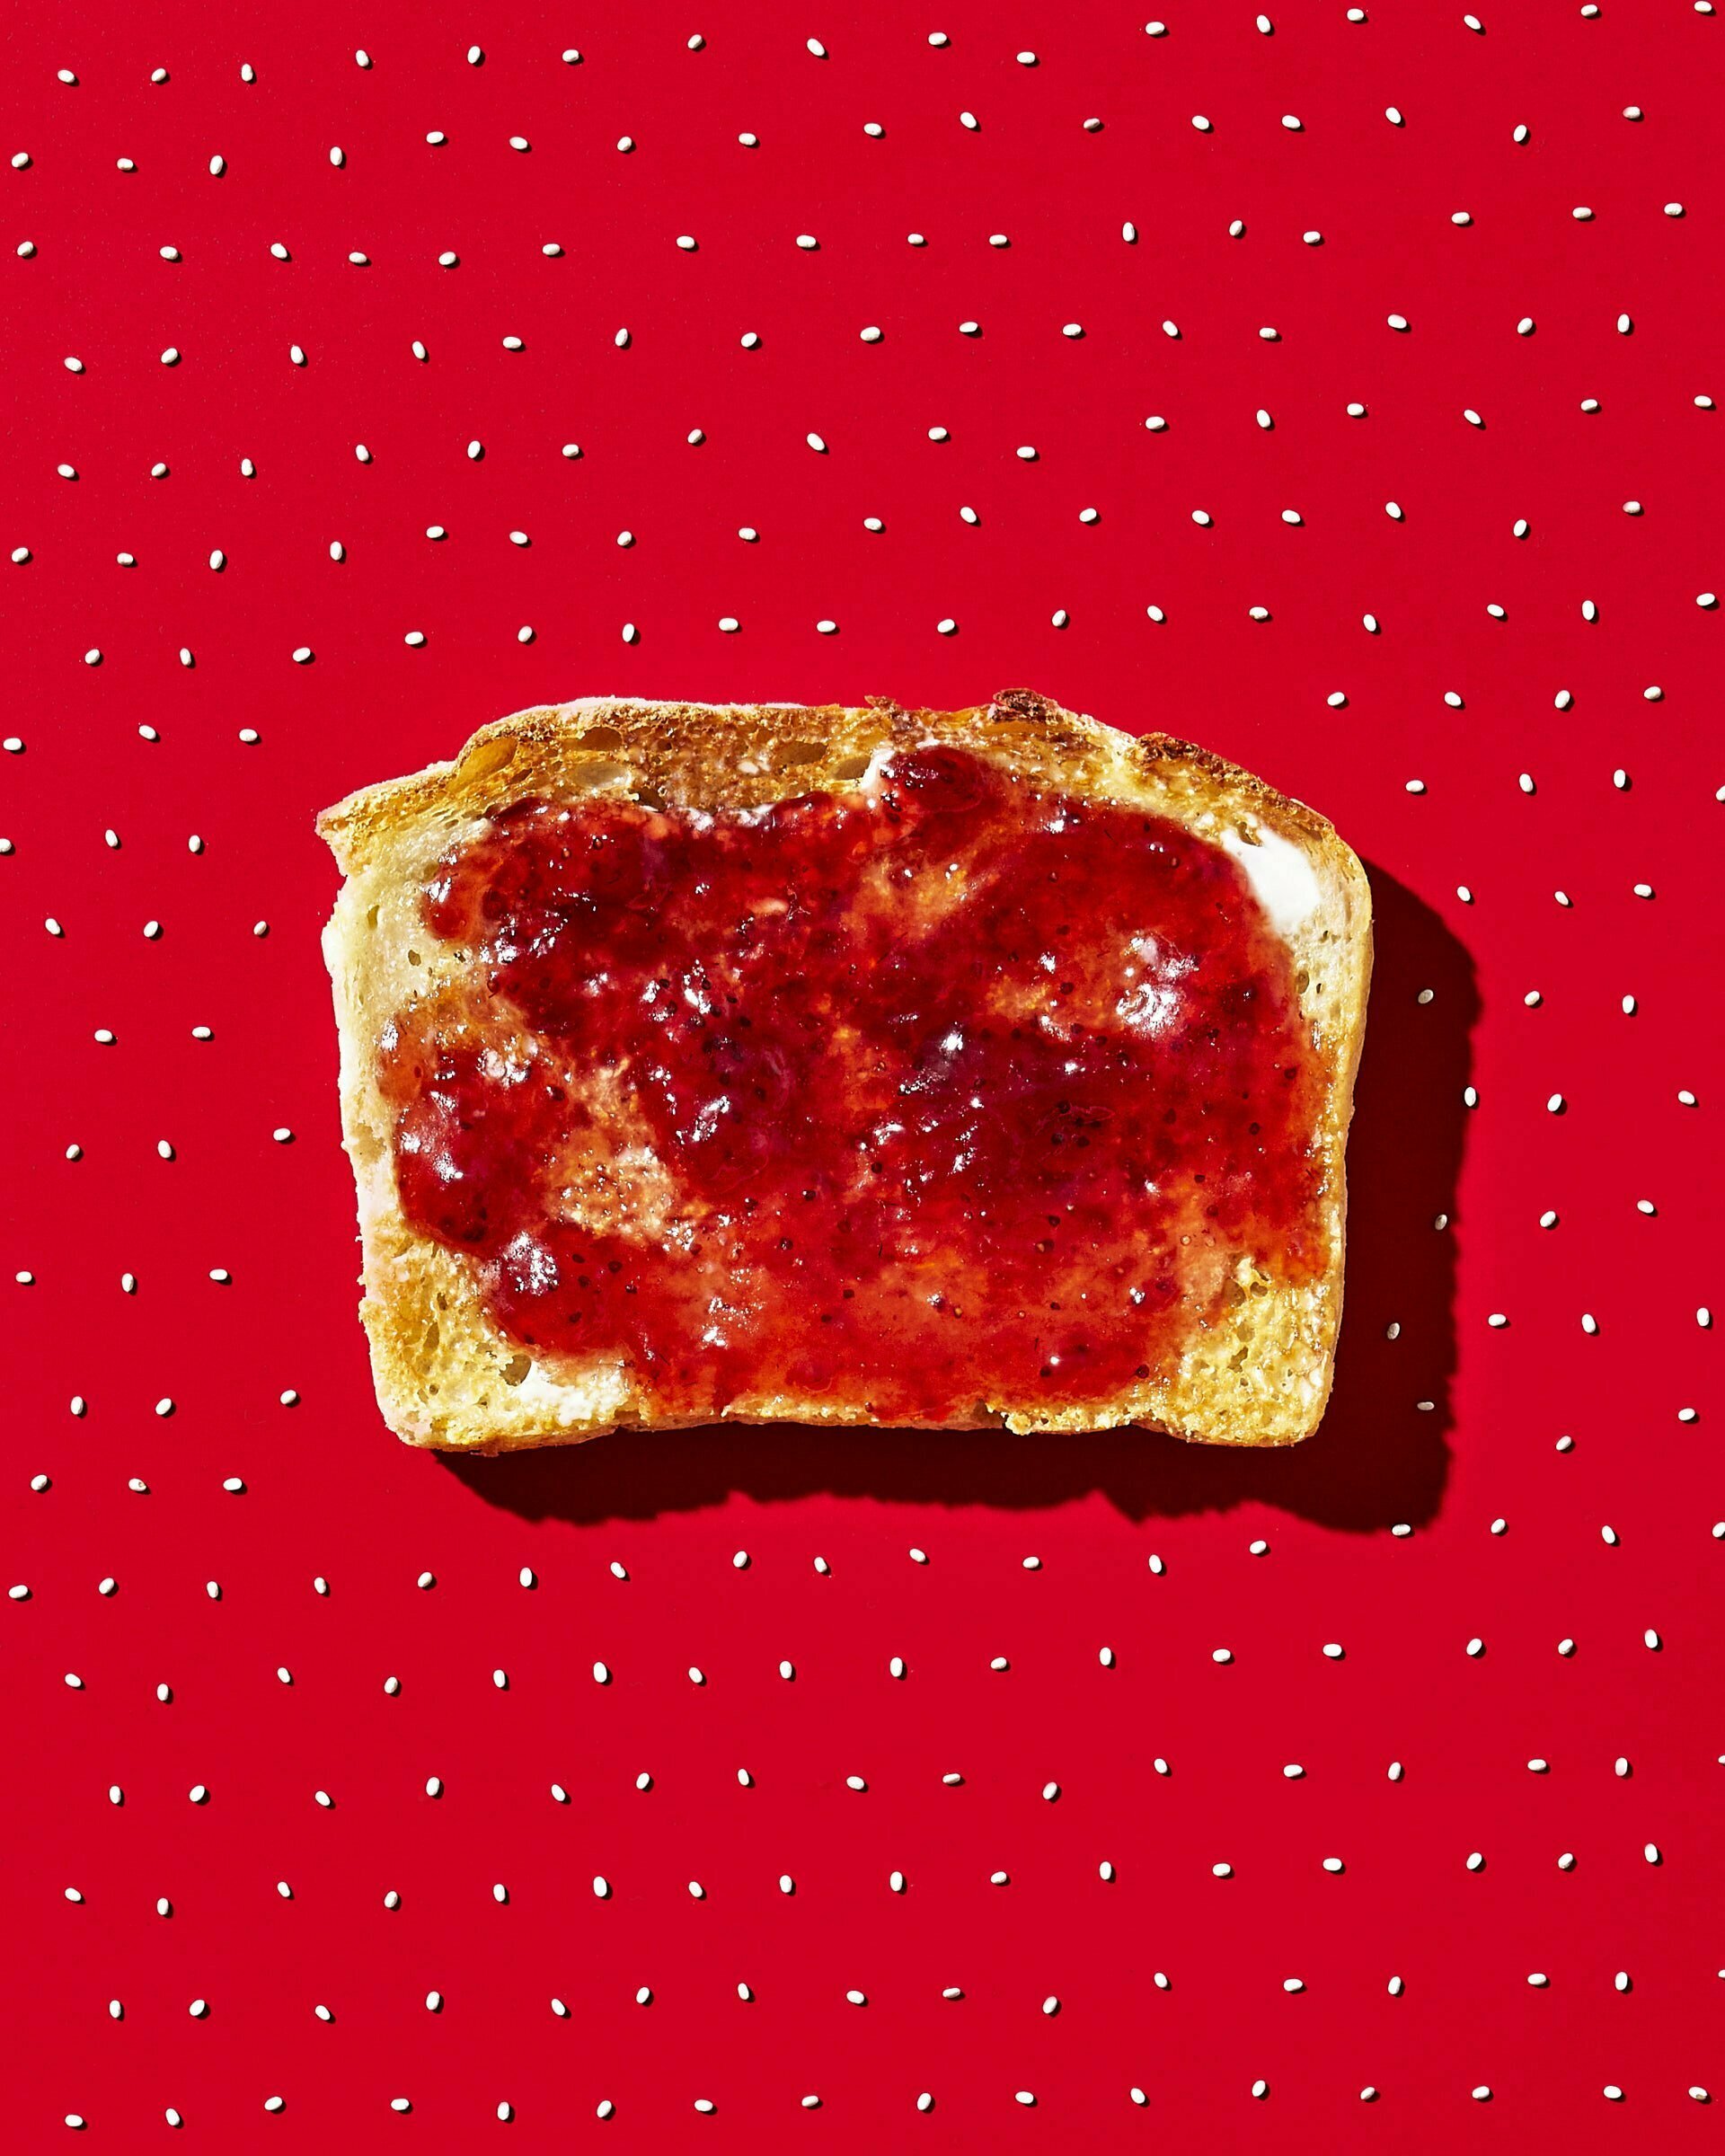 White Bread with butter and strawberry jam on a bright red background with white polka dots